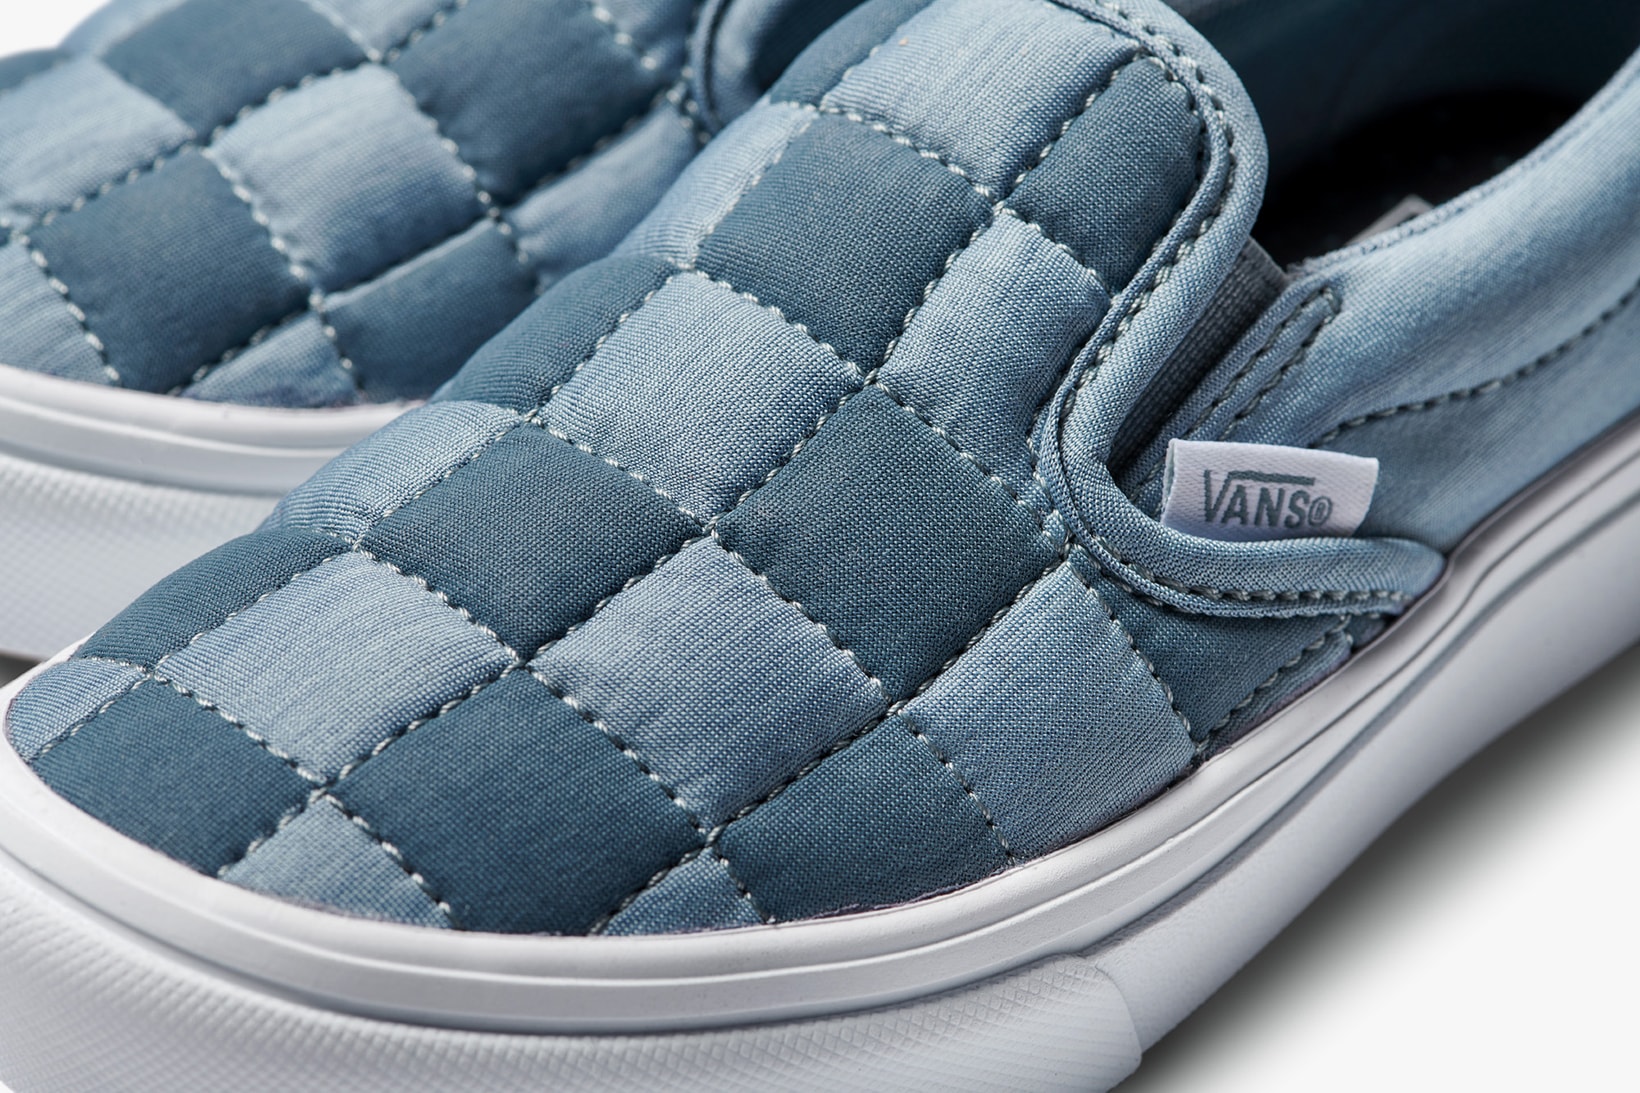 vans comfycush old new skool slip on sneakers autism awareness sensory inclusive charity donation checkered print hearts navy blue white 